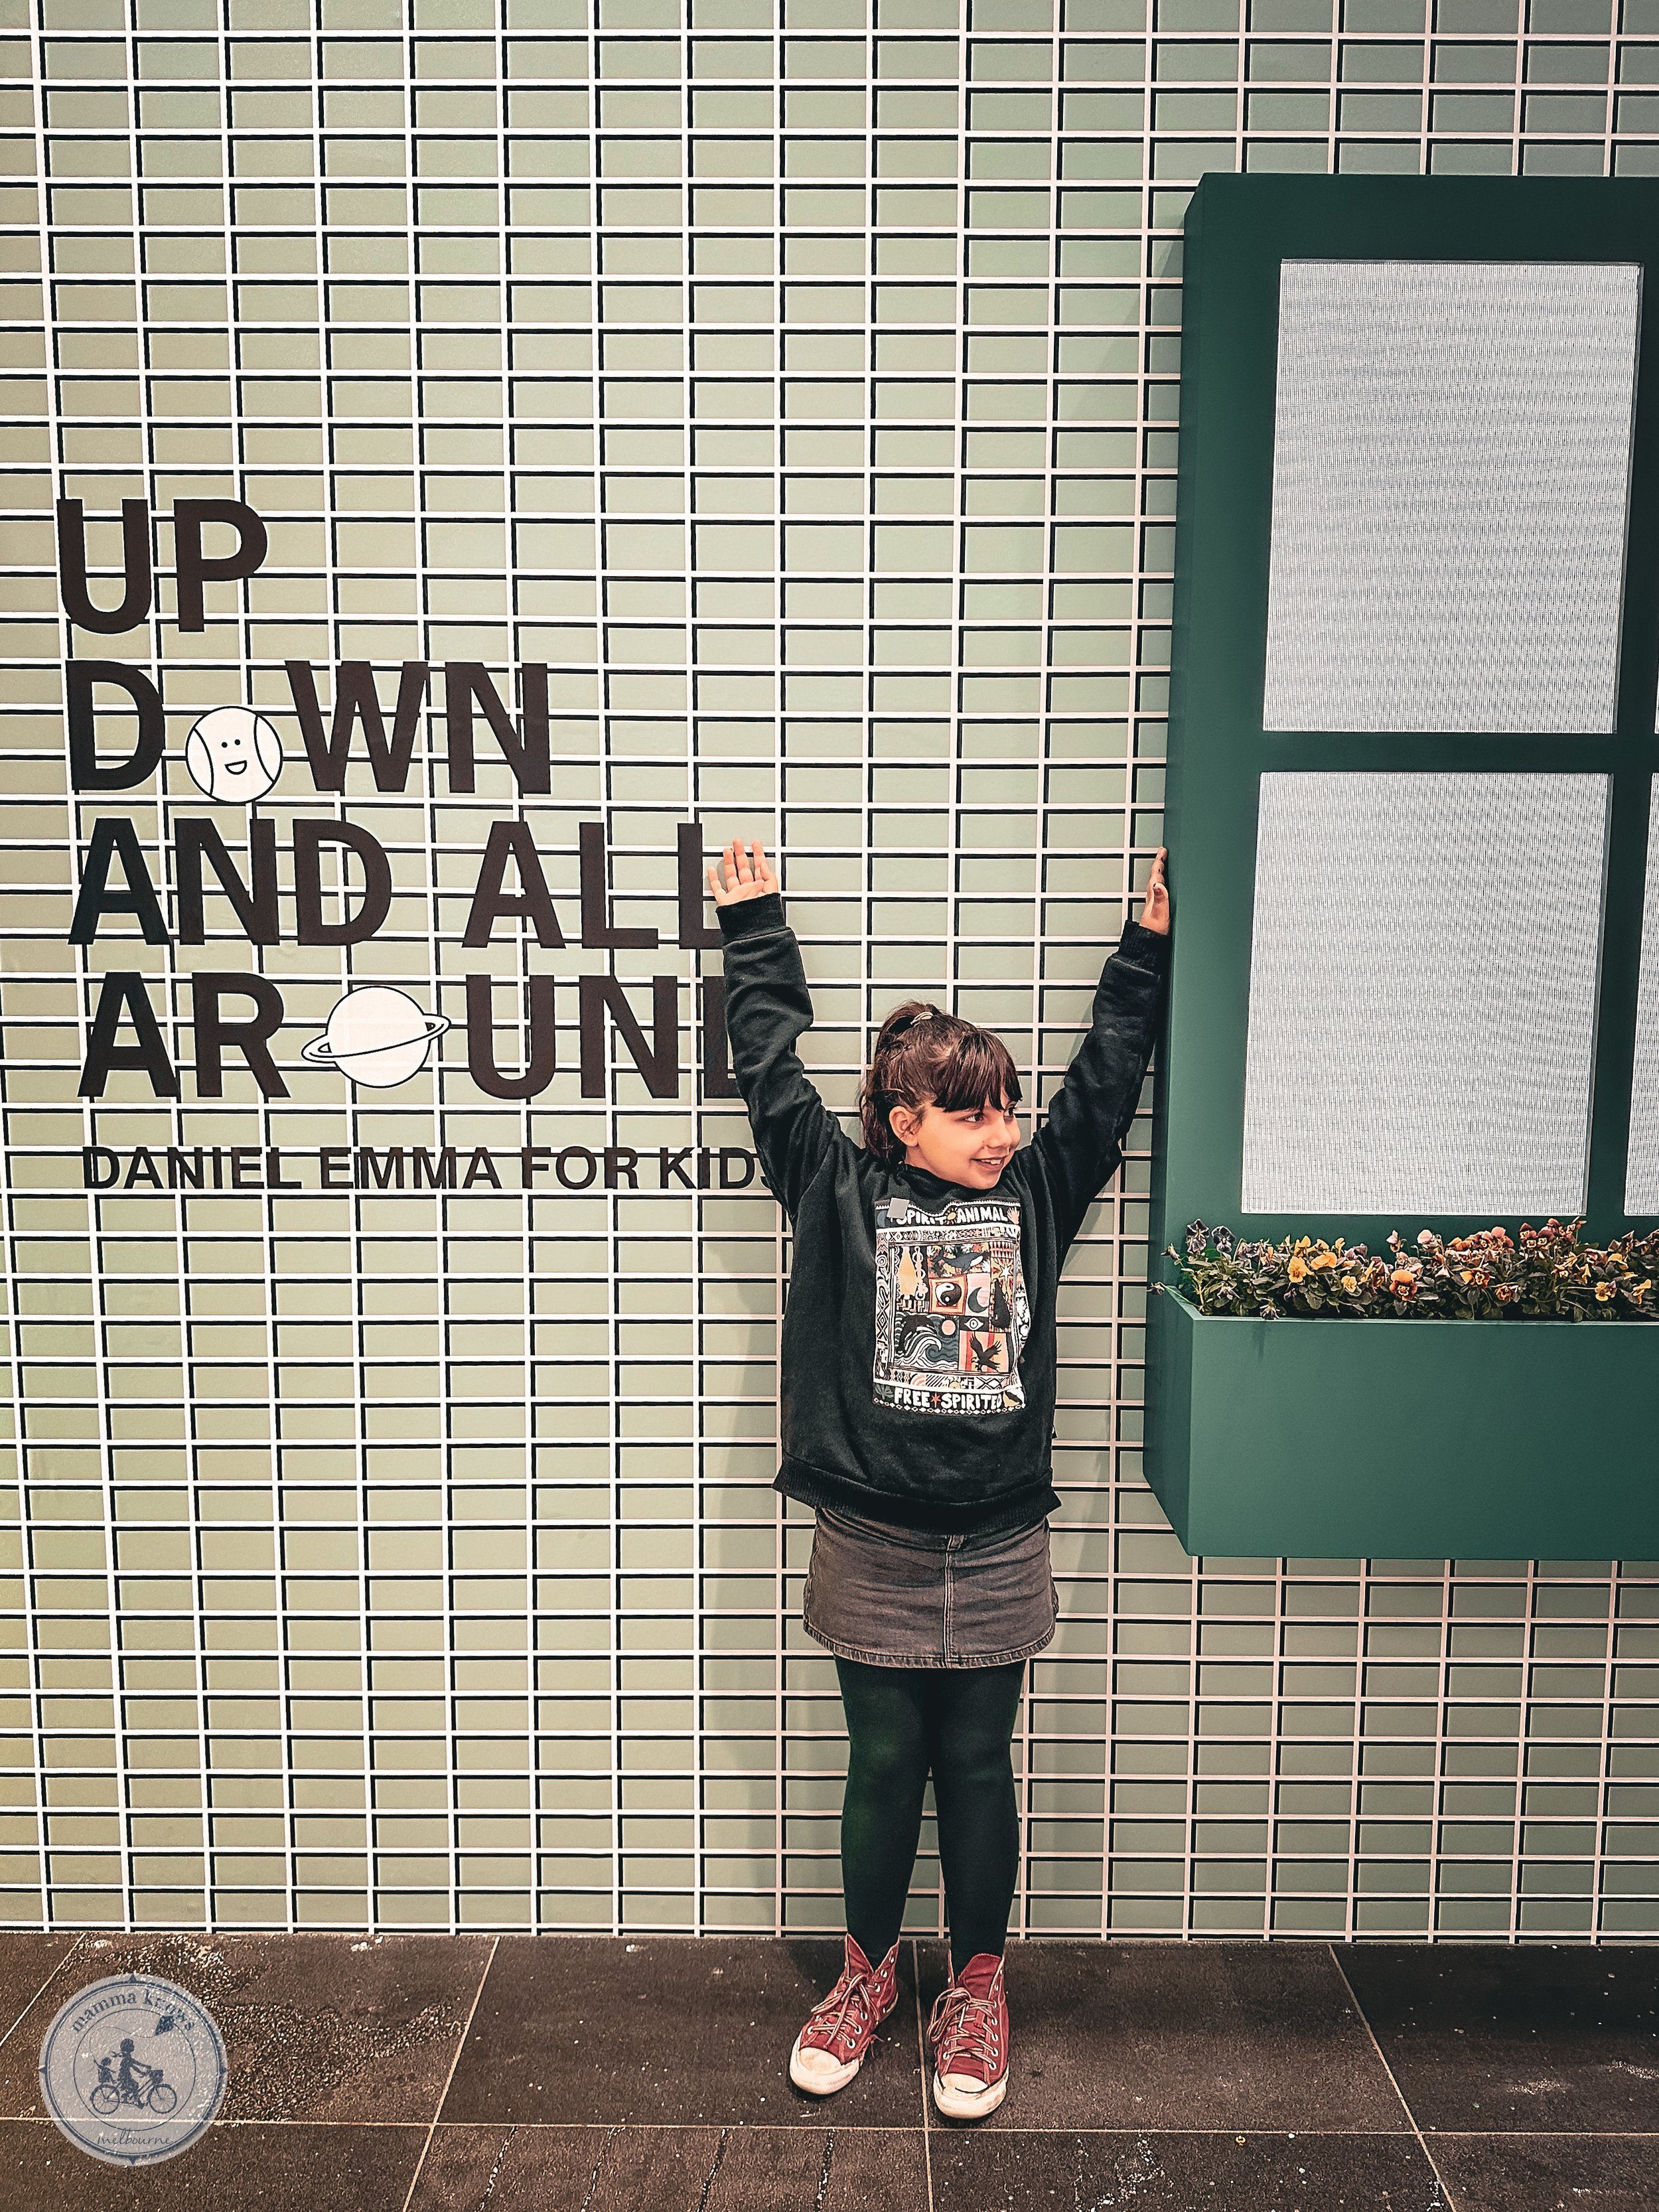 Up, Down and All Around at NGV